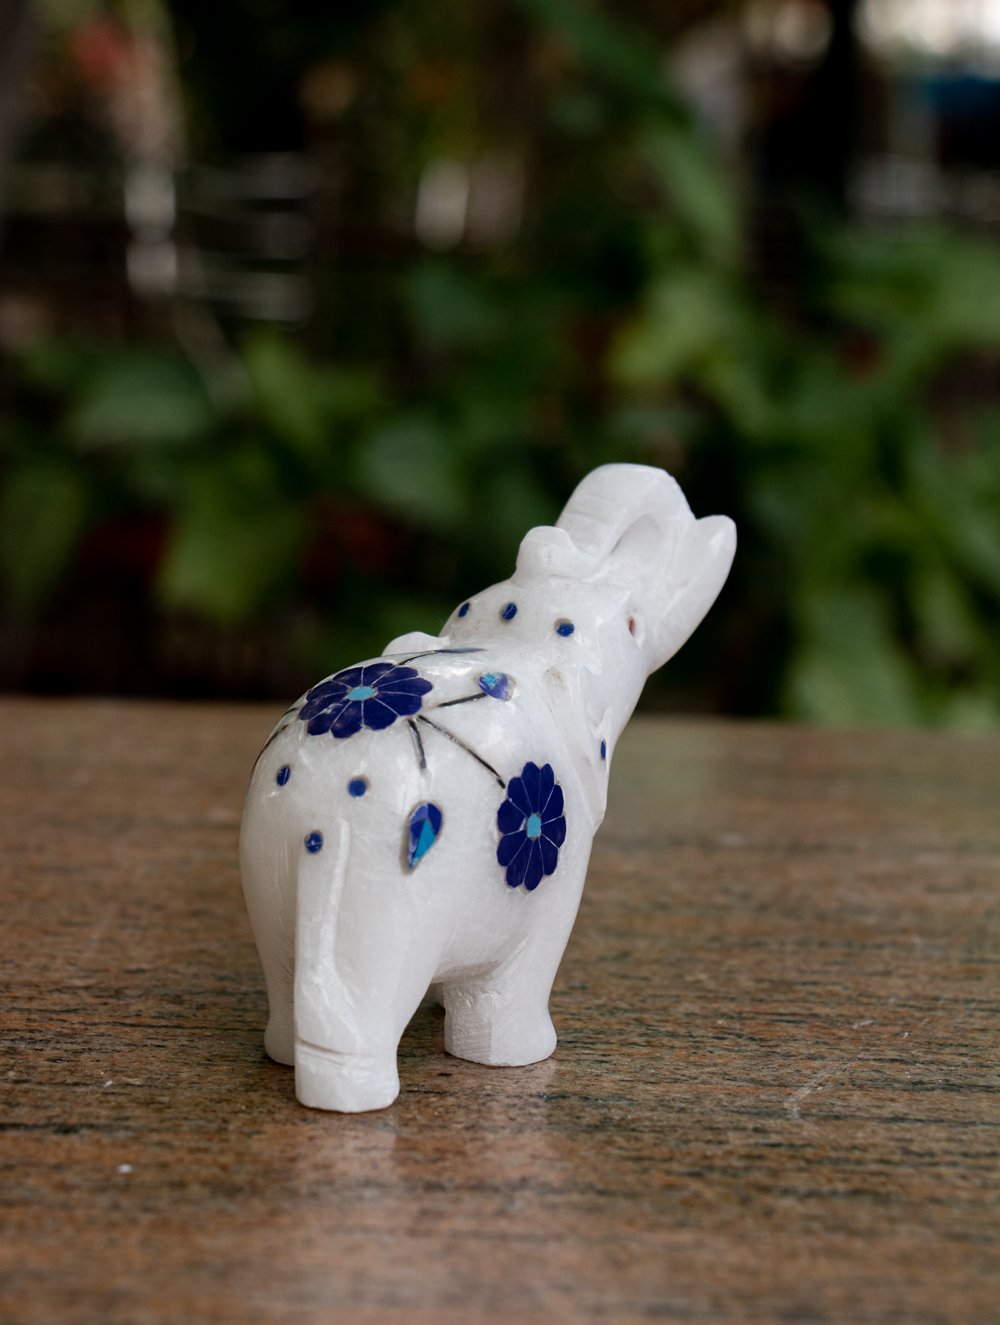 Load image into Gallery viewer, Marble Inlay Curio Elephant Small